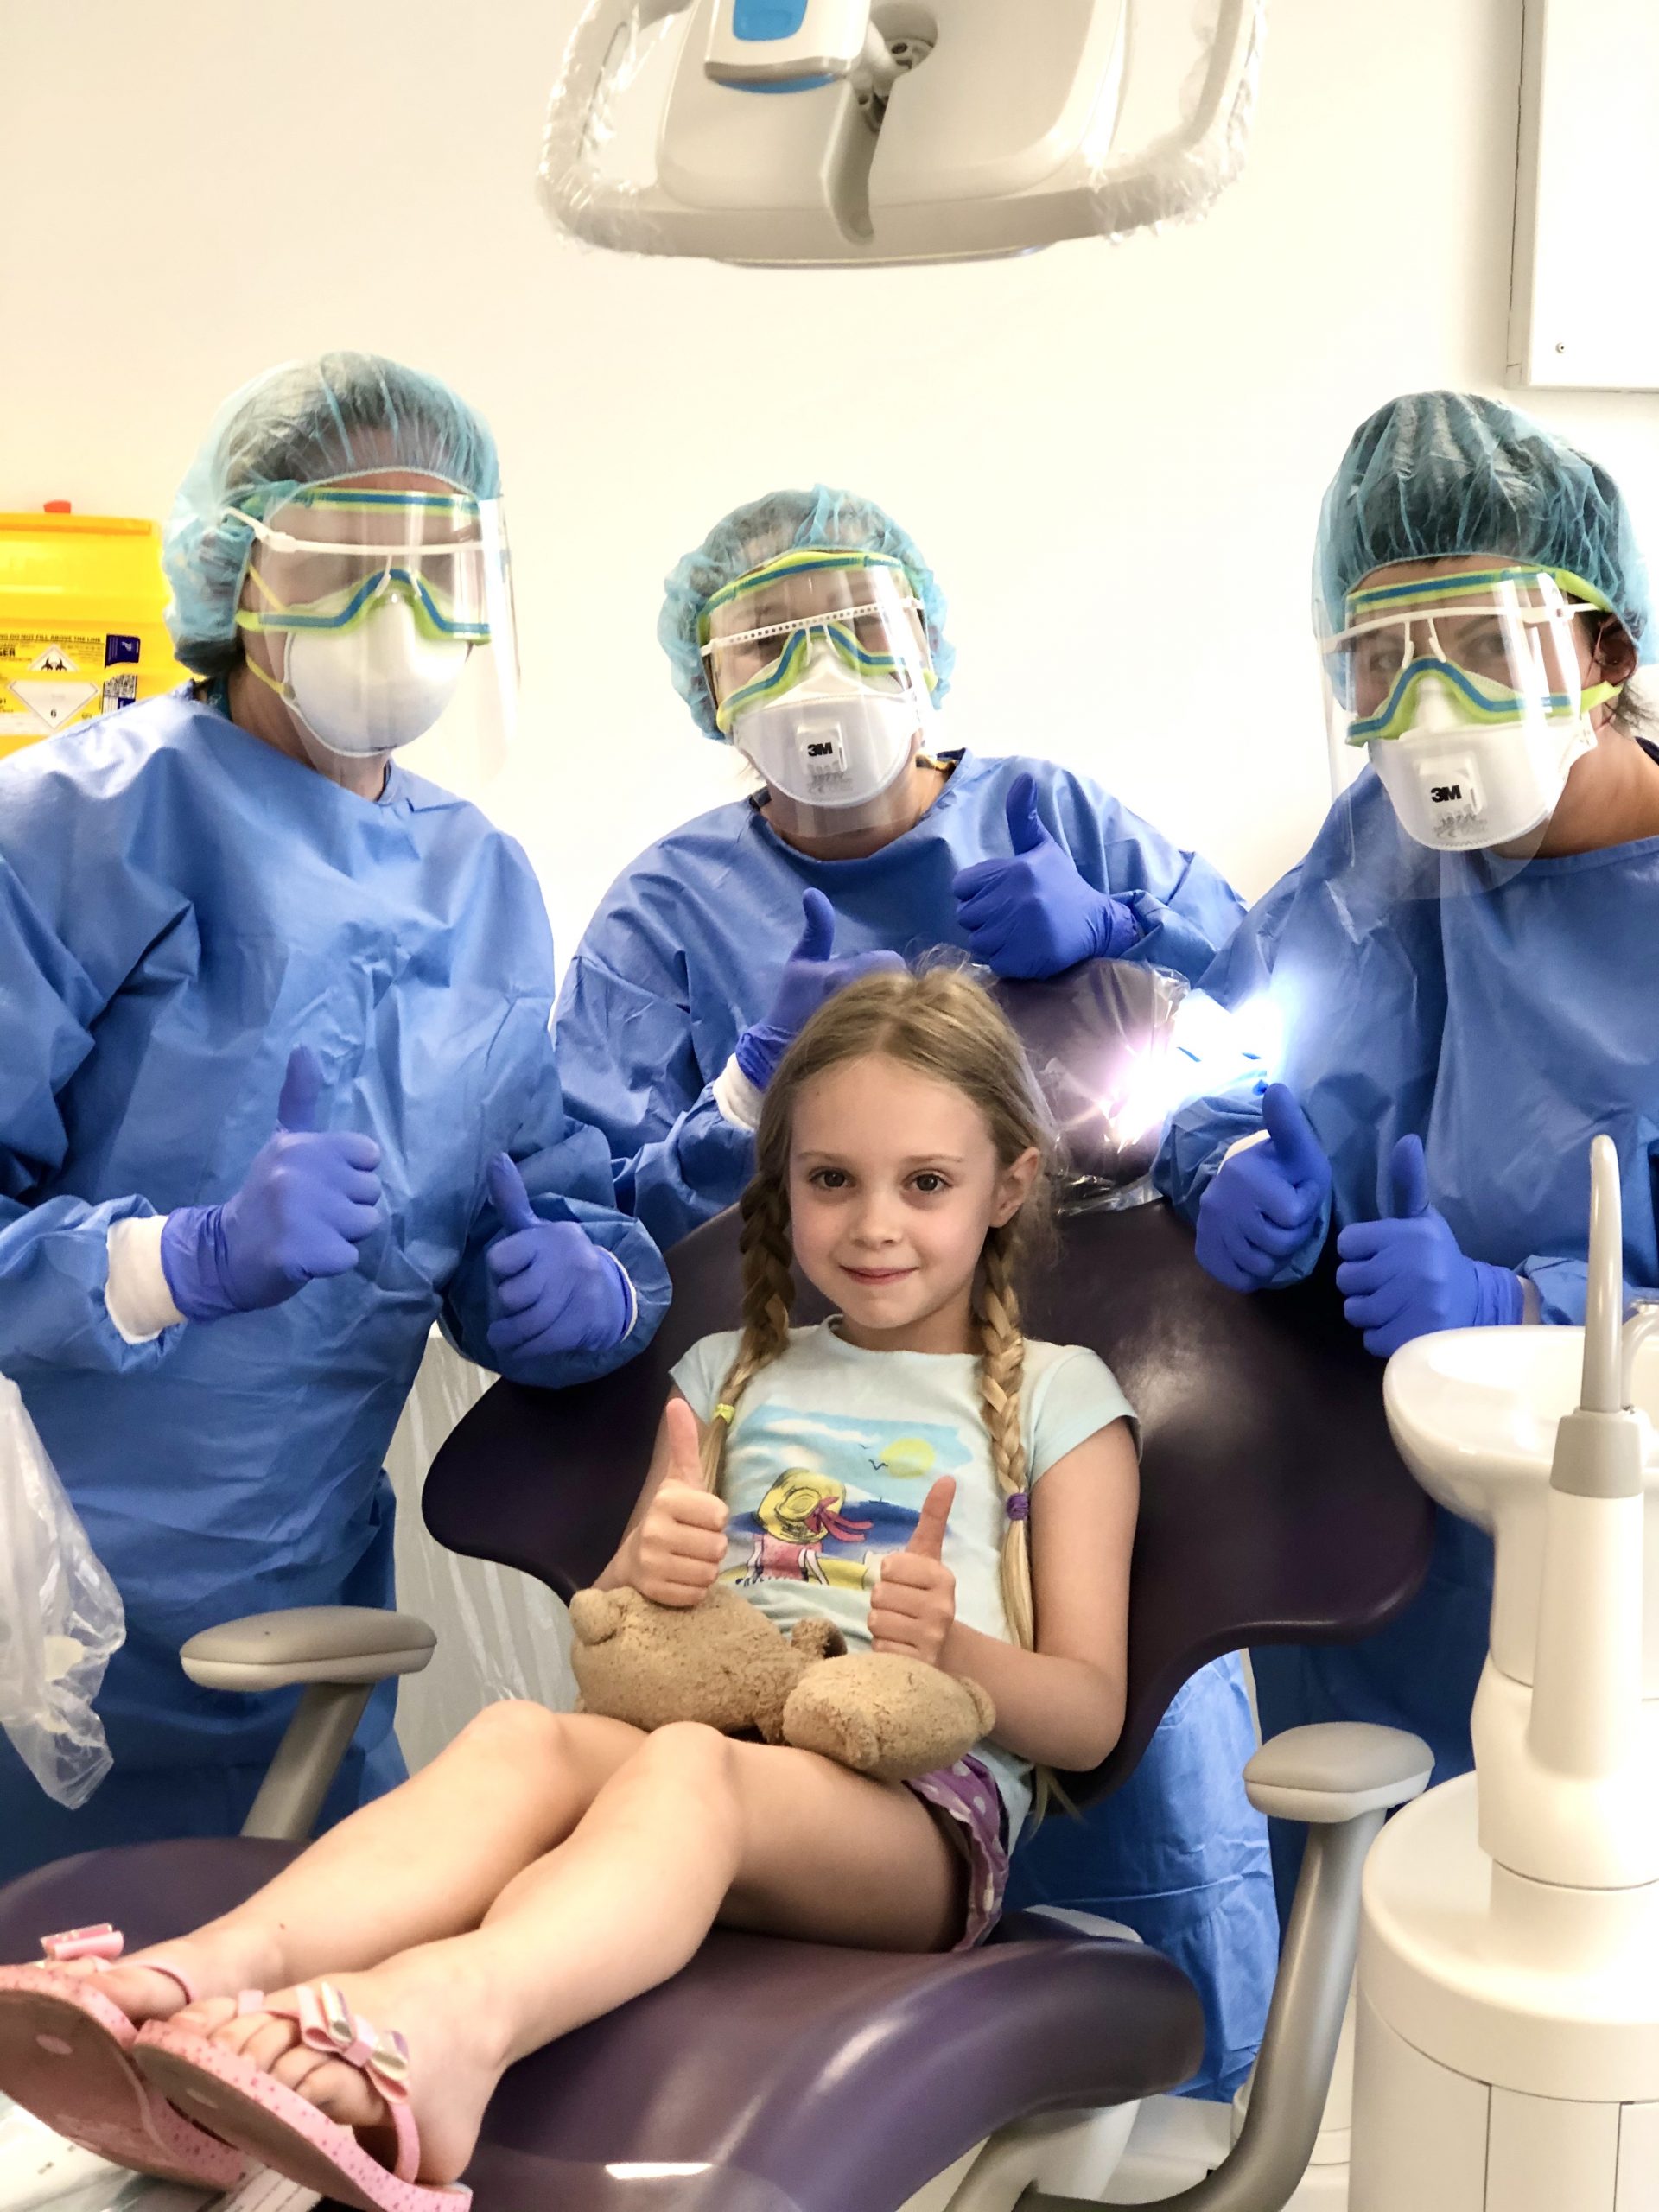 Young patient treated at urgent dental care hub with team in PPE